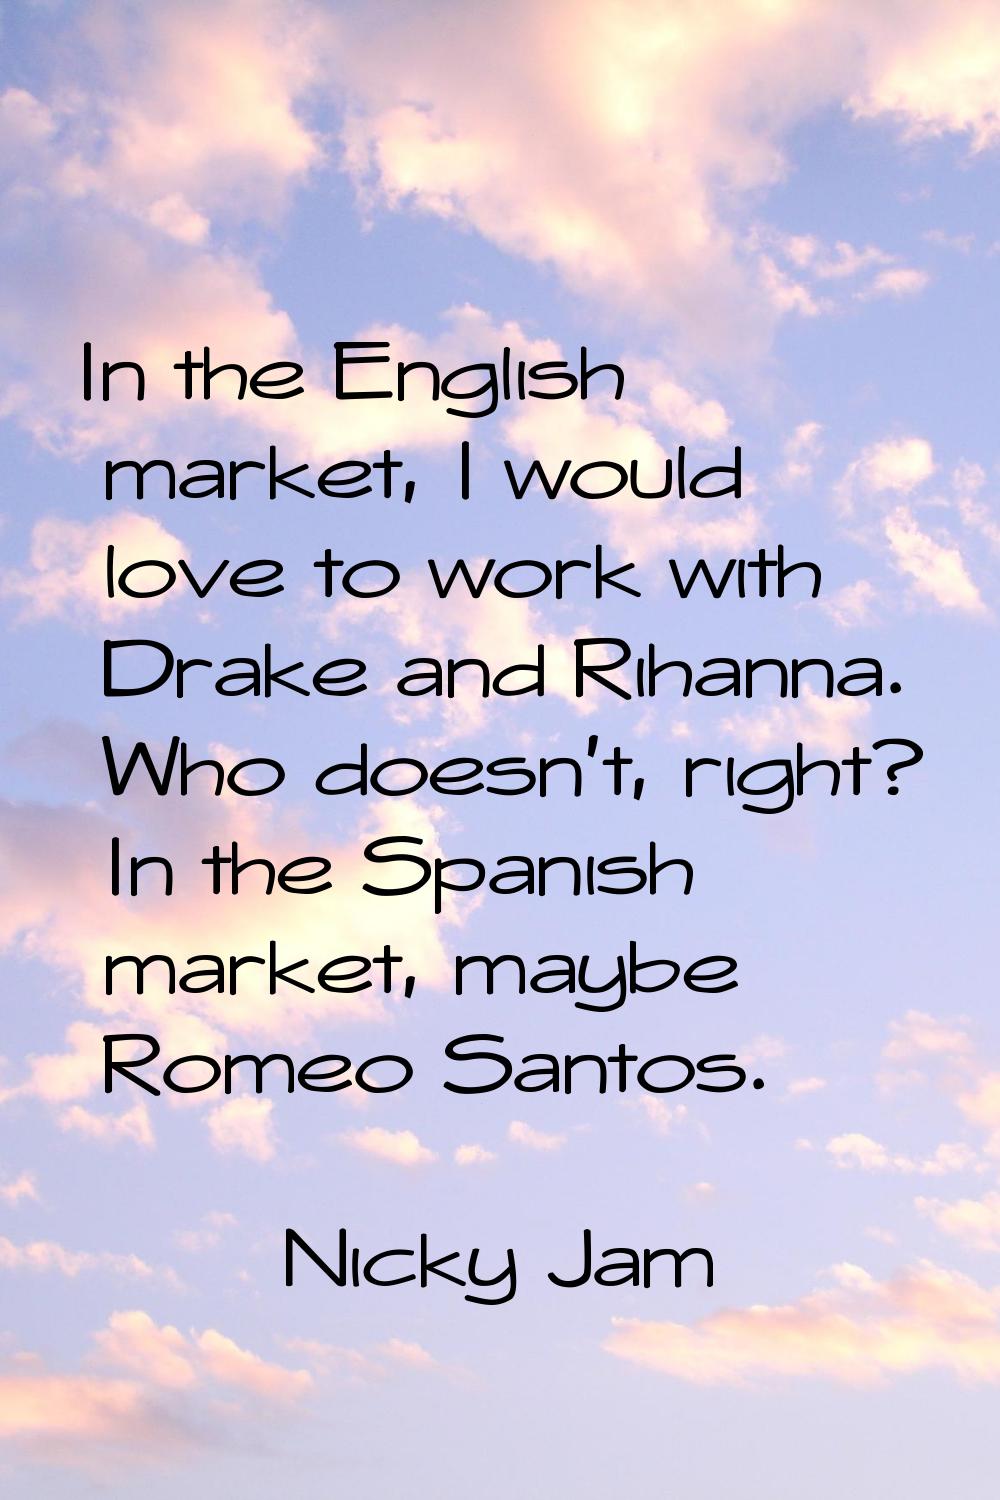 In the English market, I would love to work with Drake and Rihanna. Who doesn't, right? In the Span